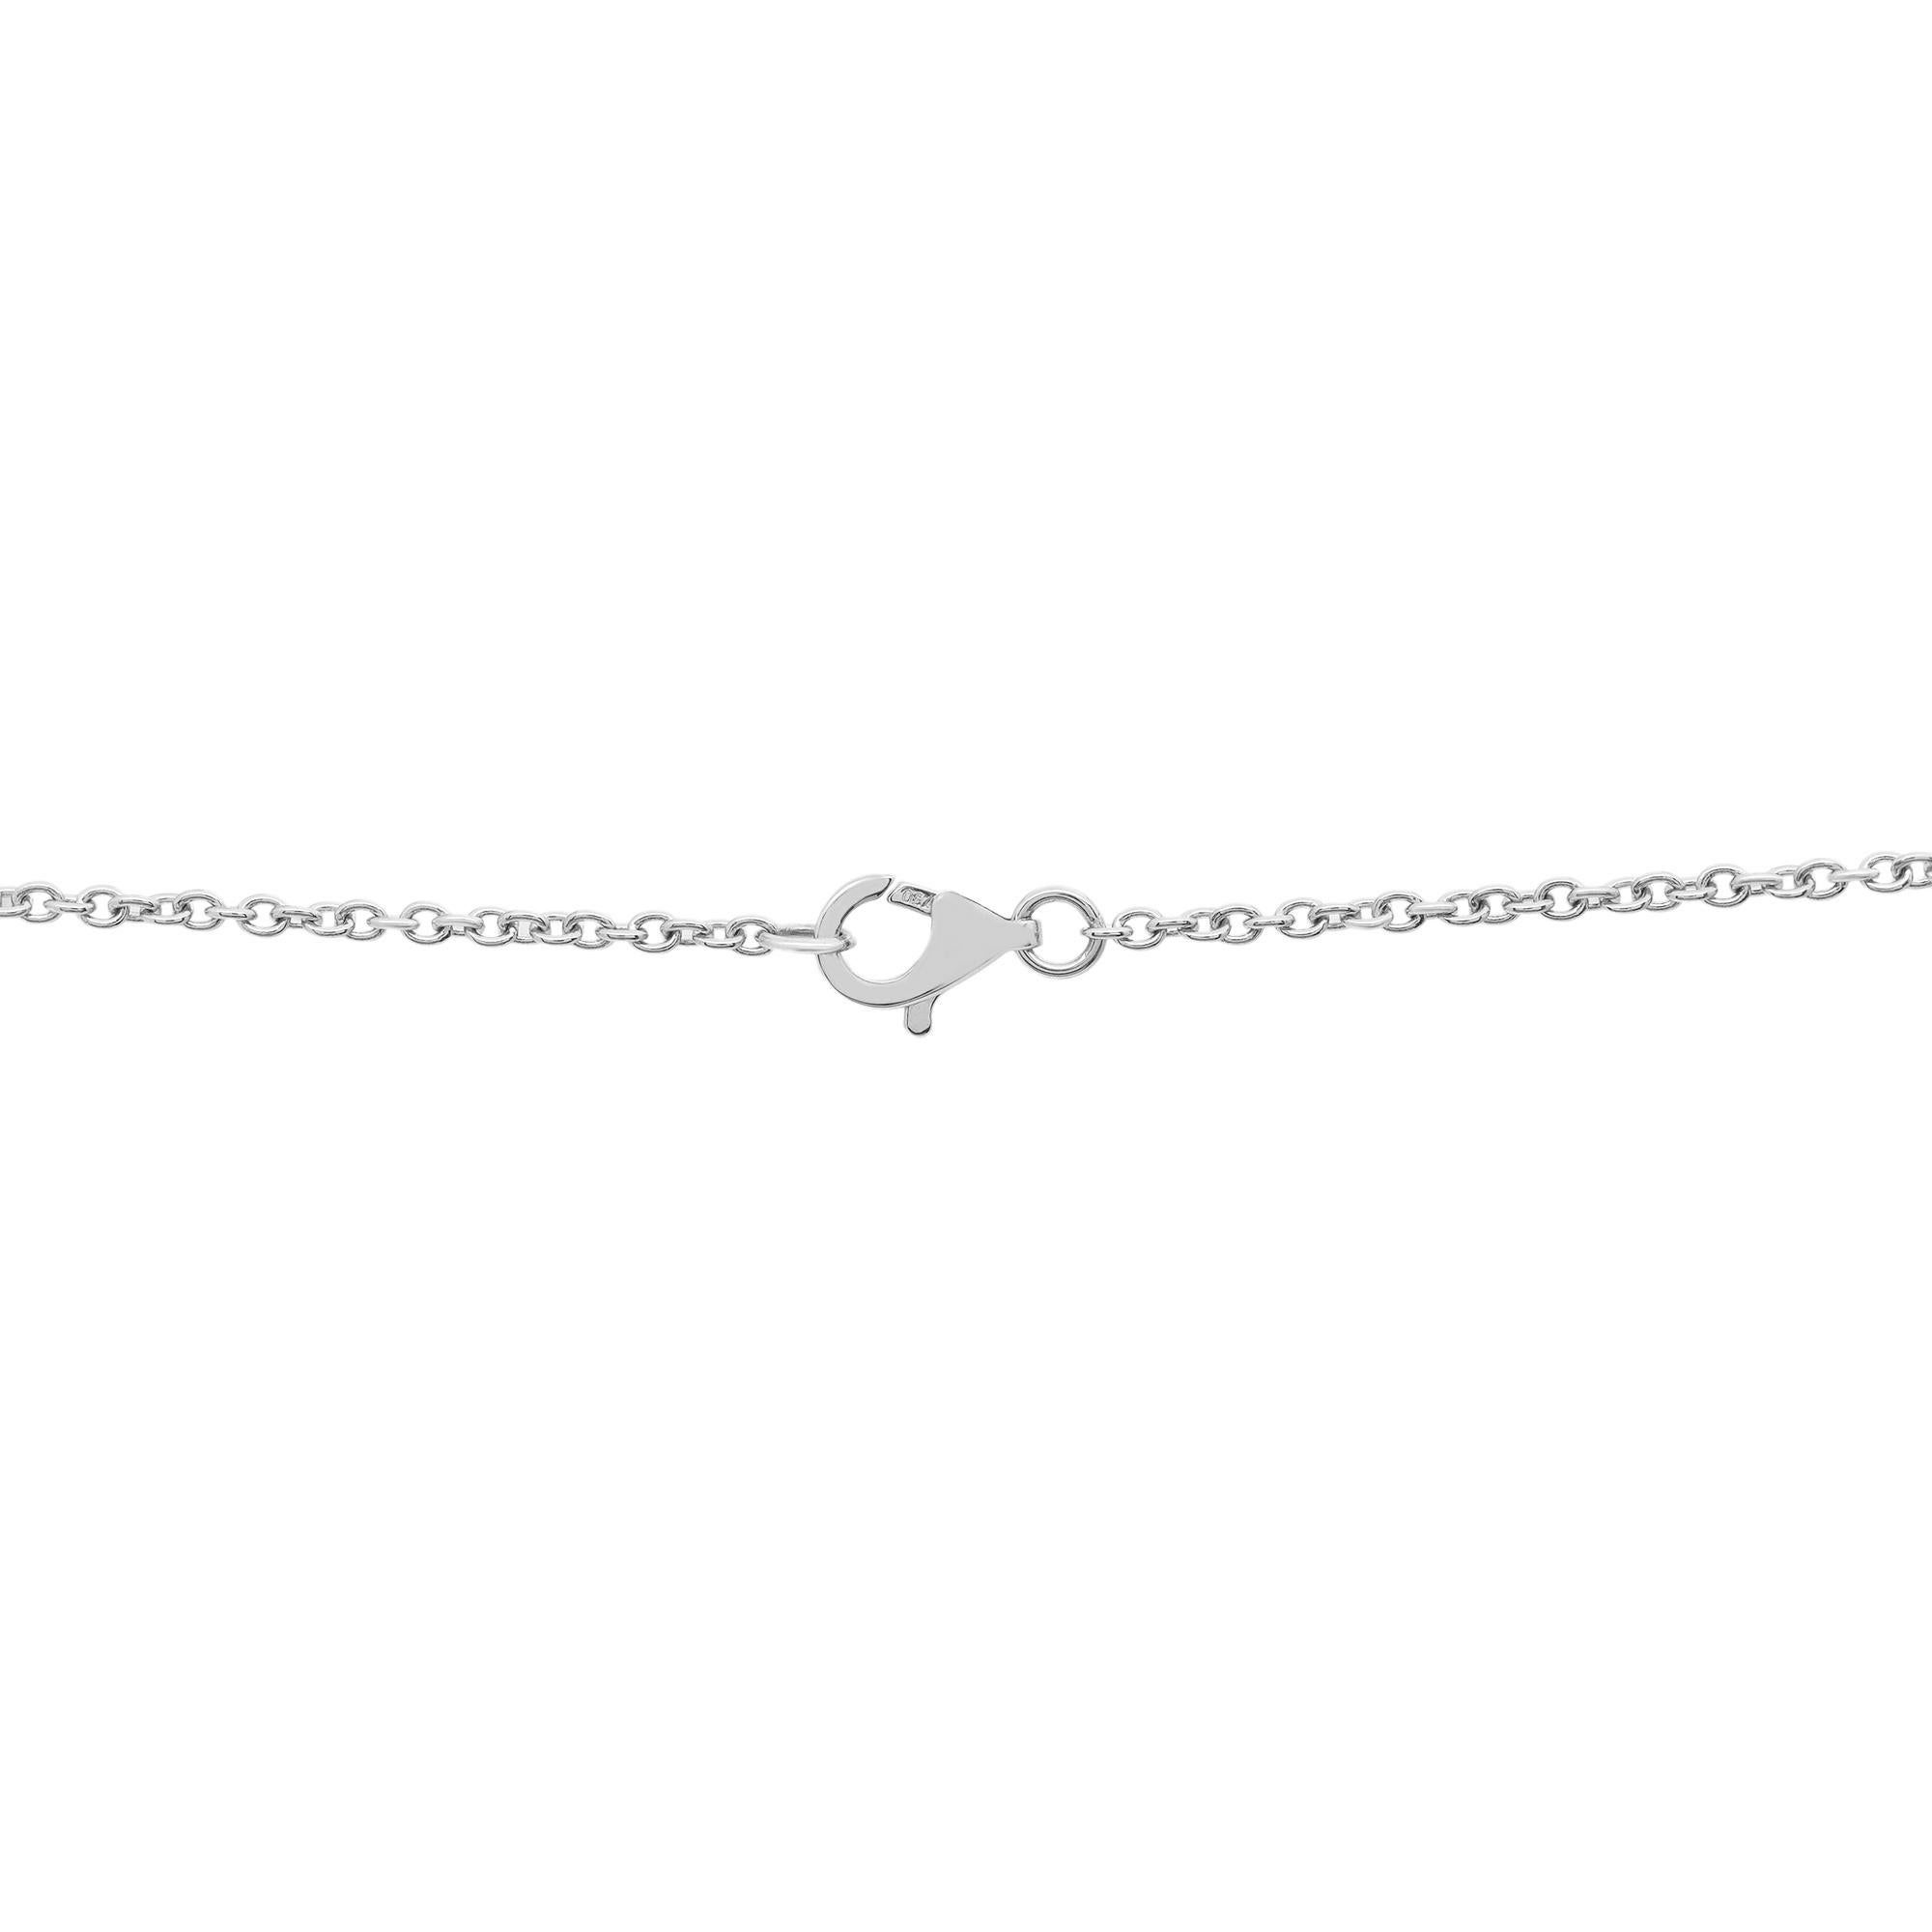 Women's 0.90Cttw Round Cut Diamond Floral Bar Necklace 18K White Gold 18 Inches For Sale